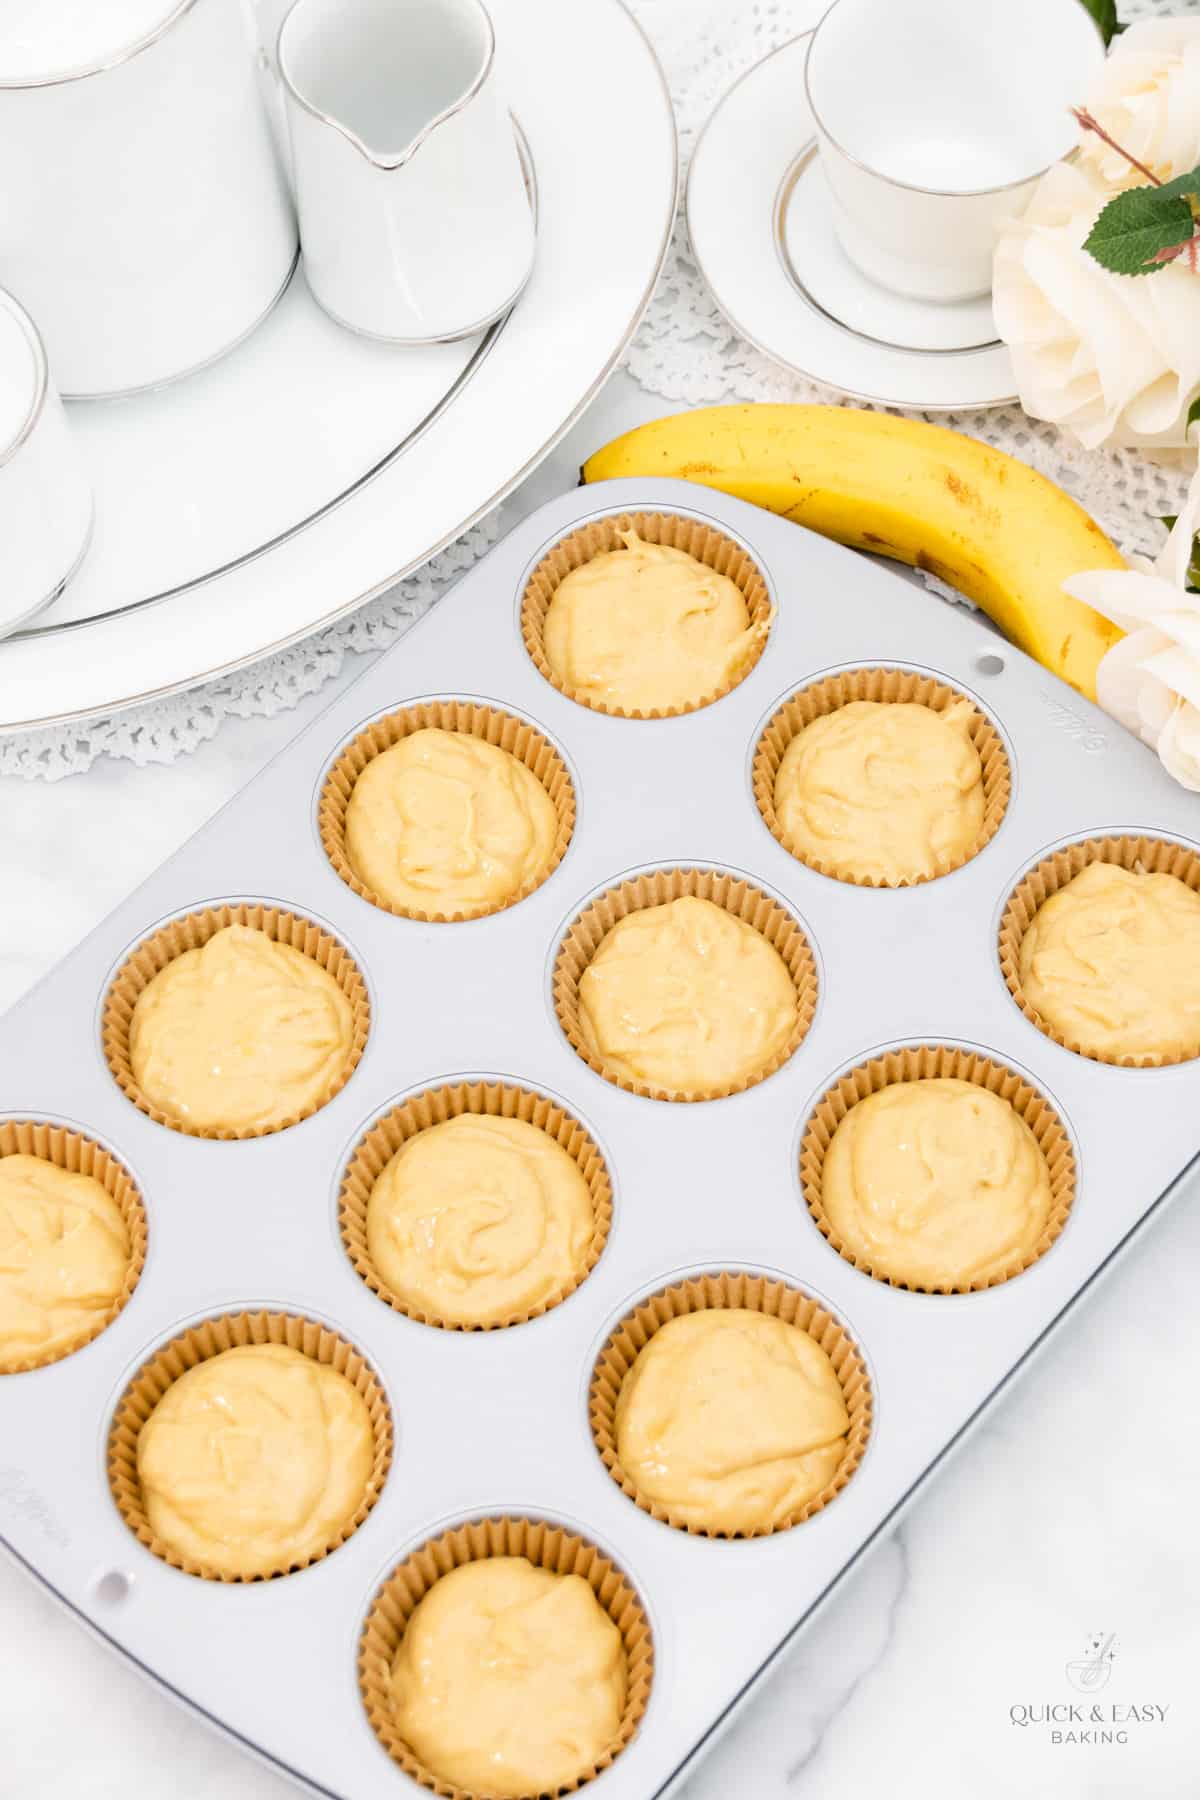 Muffin batter with bananas in cupcake liners.